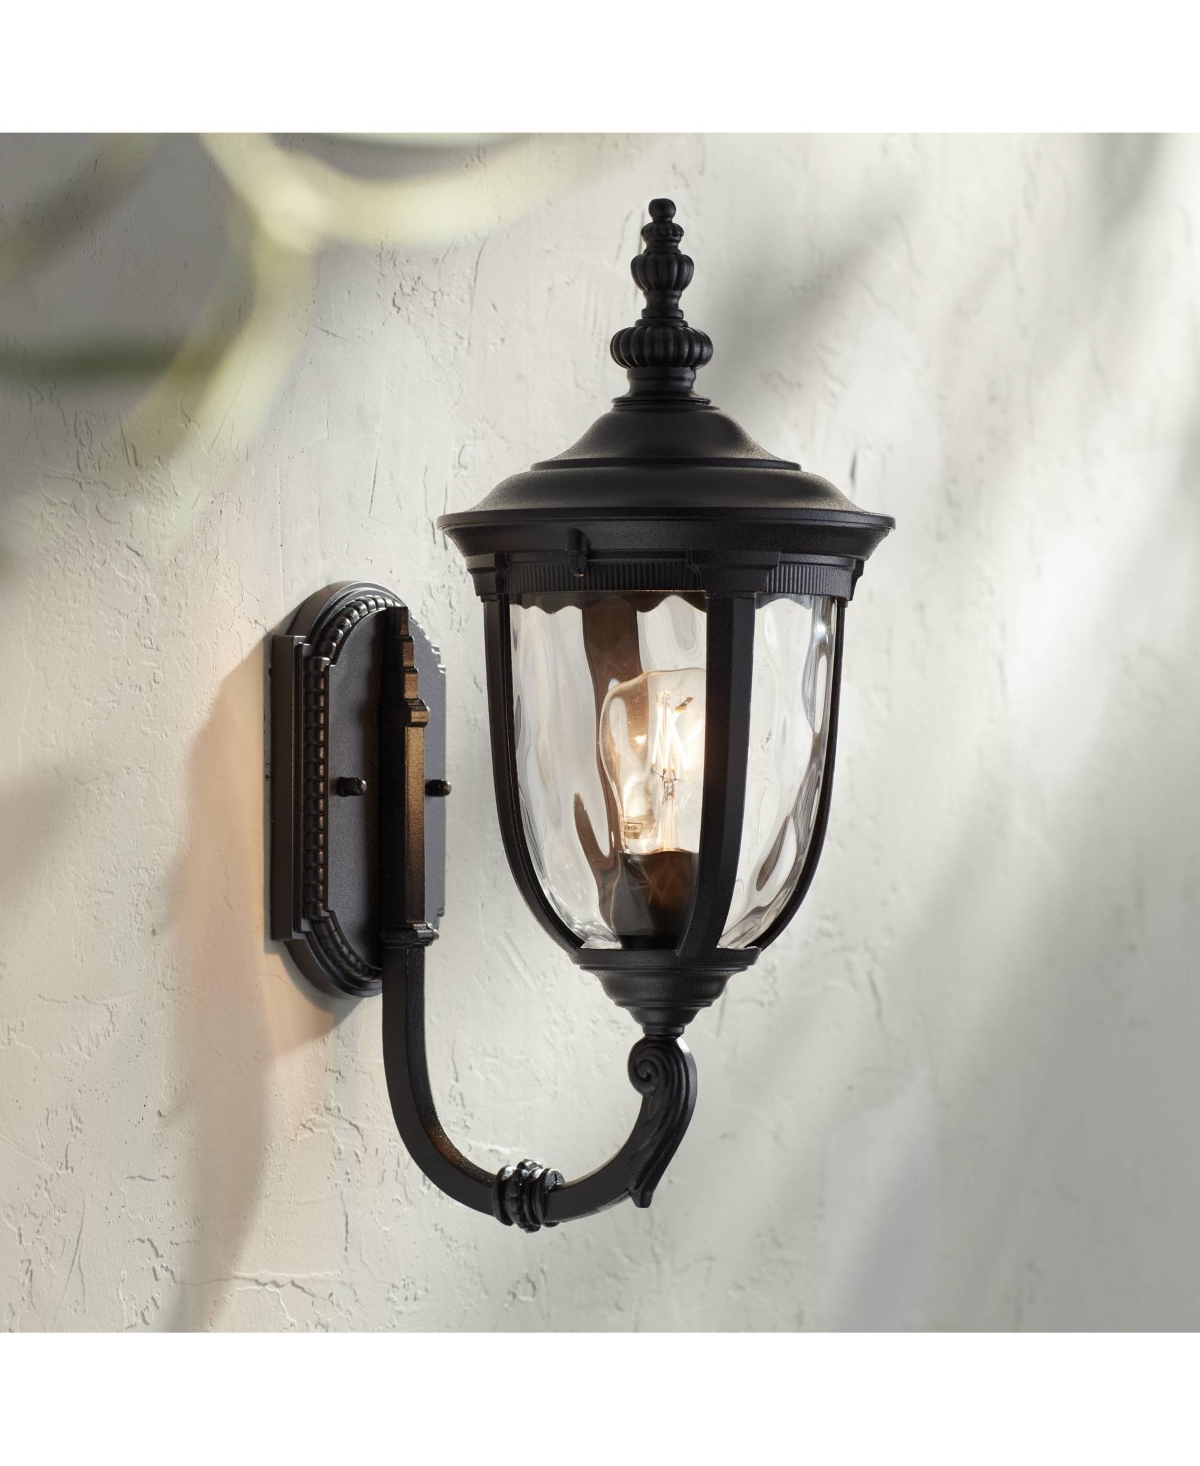 Bellagio European Outdoor Wall Light Fixture Texturized Black Up bridge 16 1/2" Hammered Glass for Exterior House Porch Patio Outside Deck Garage Yard